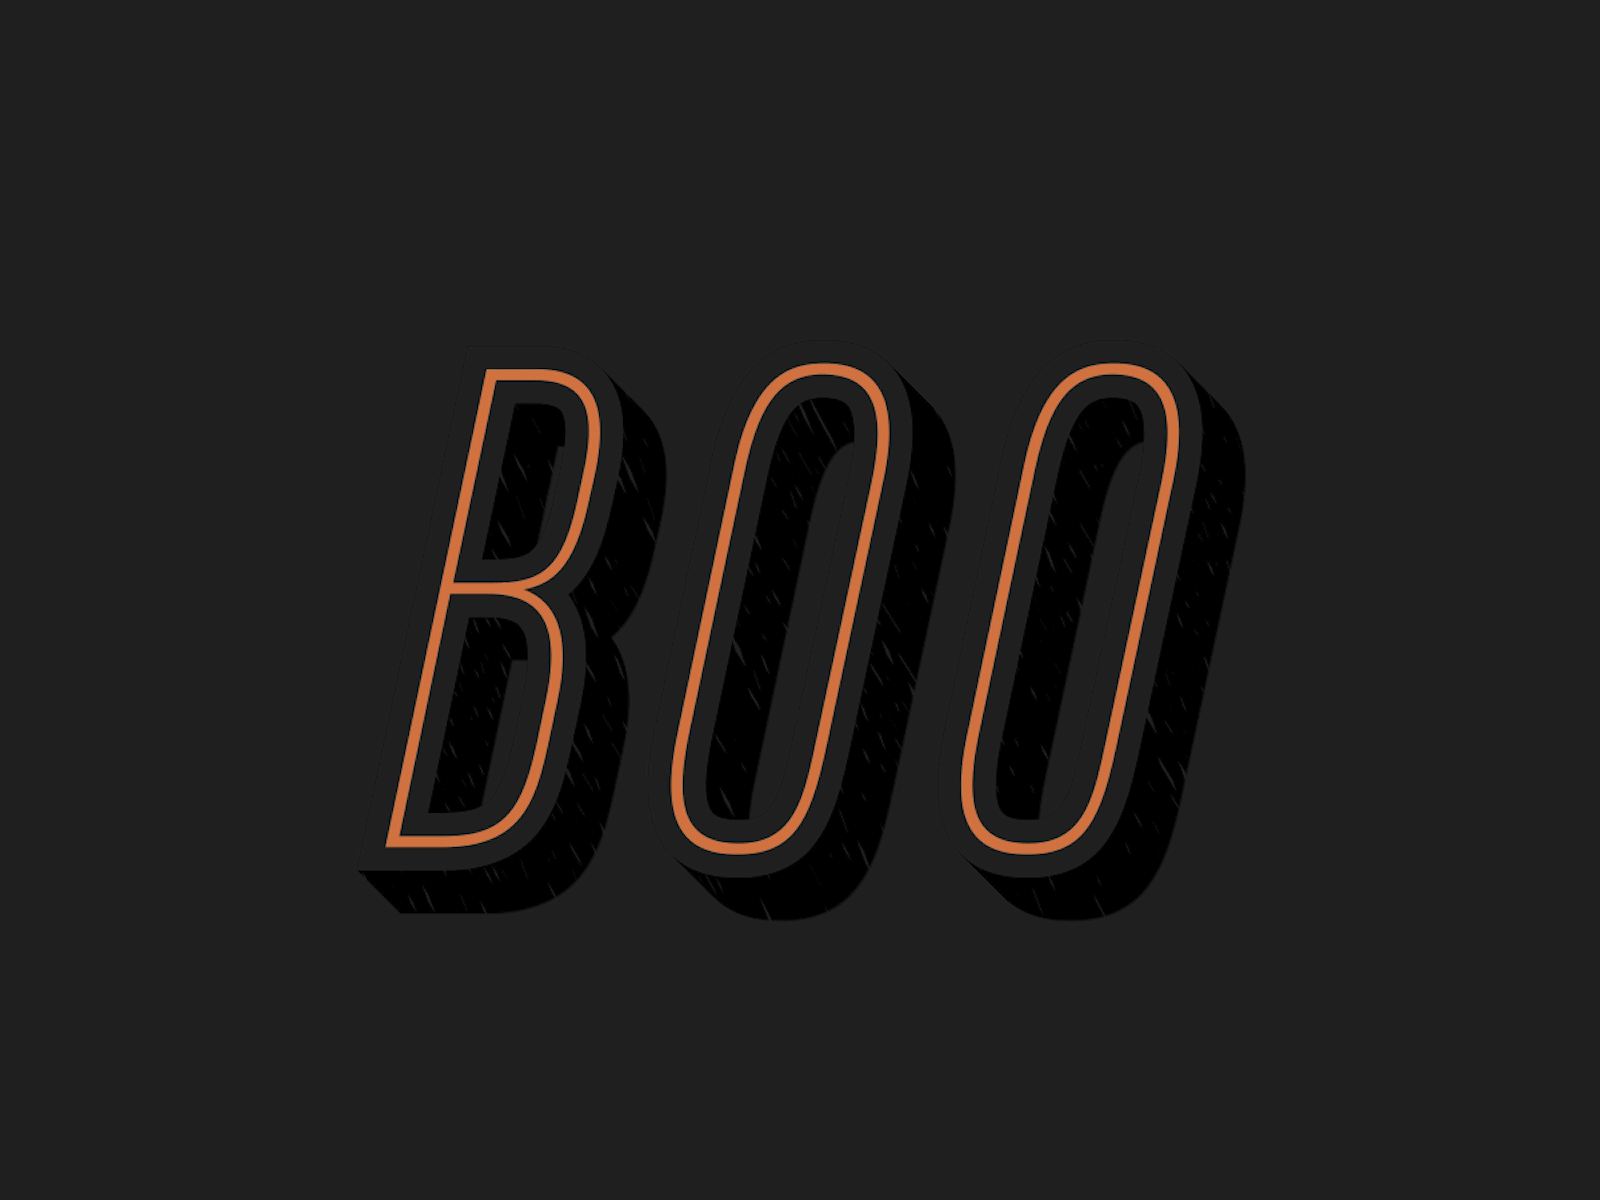 Boo! after effects animation animation 2d boo character character design cute design ghost ghosts halloween illustration loop motion graphics new repeat smiling spooky vector